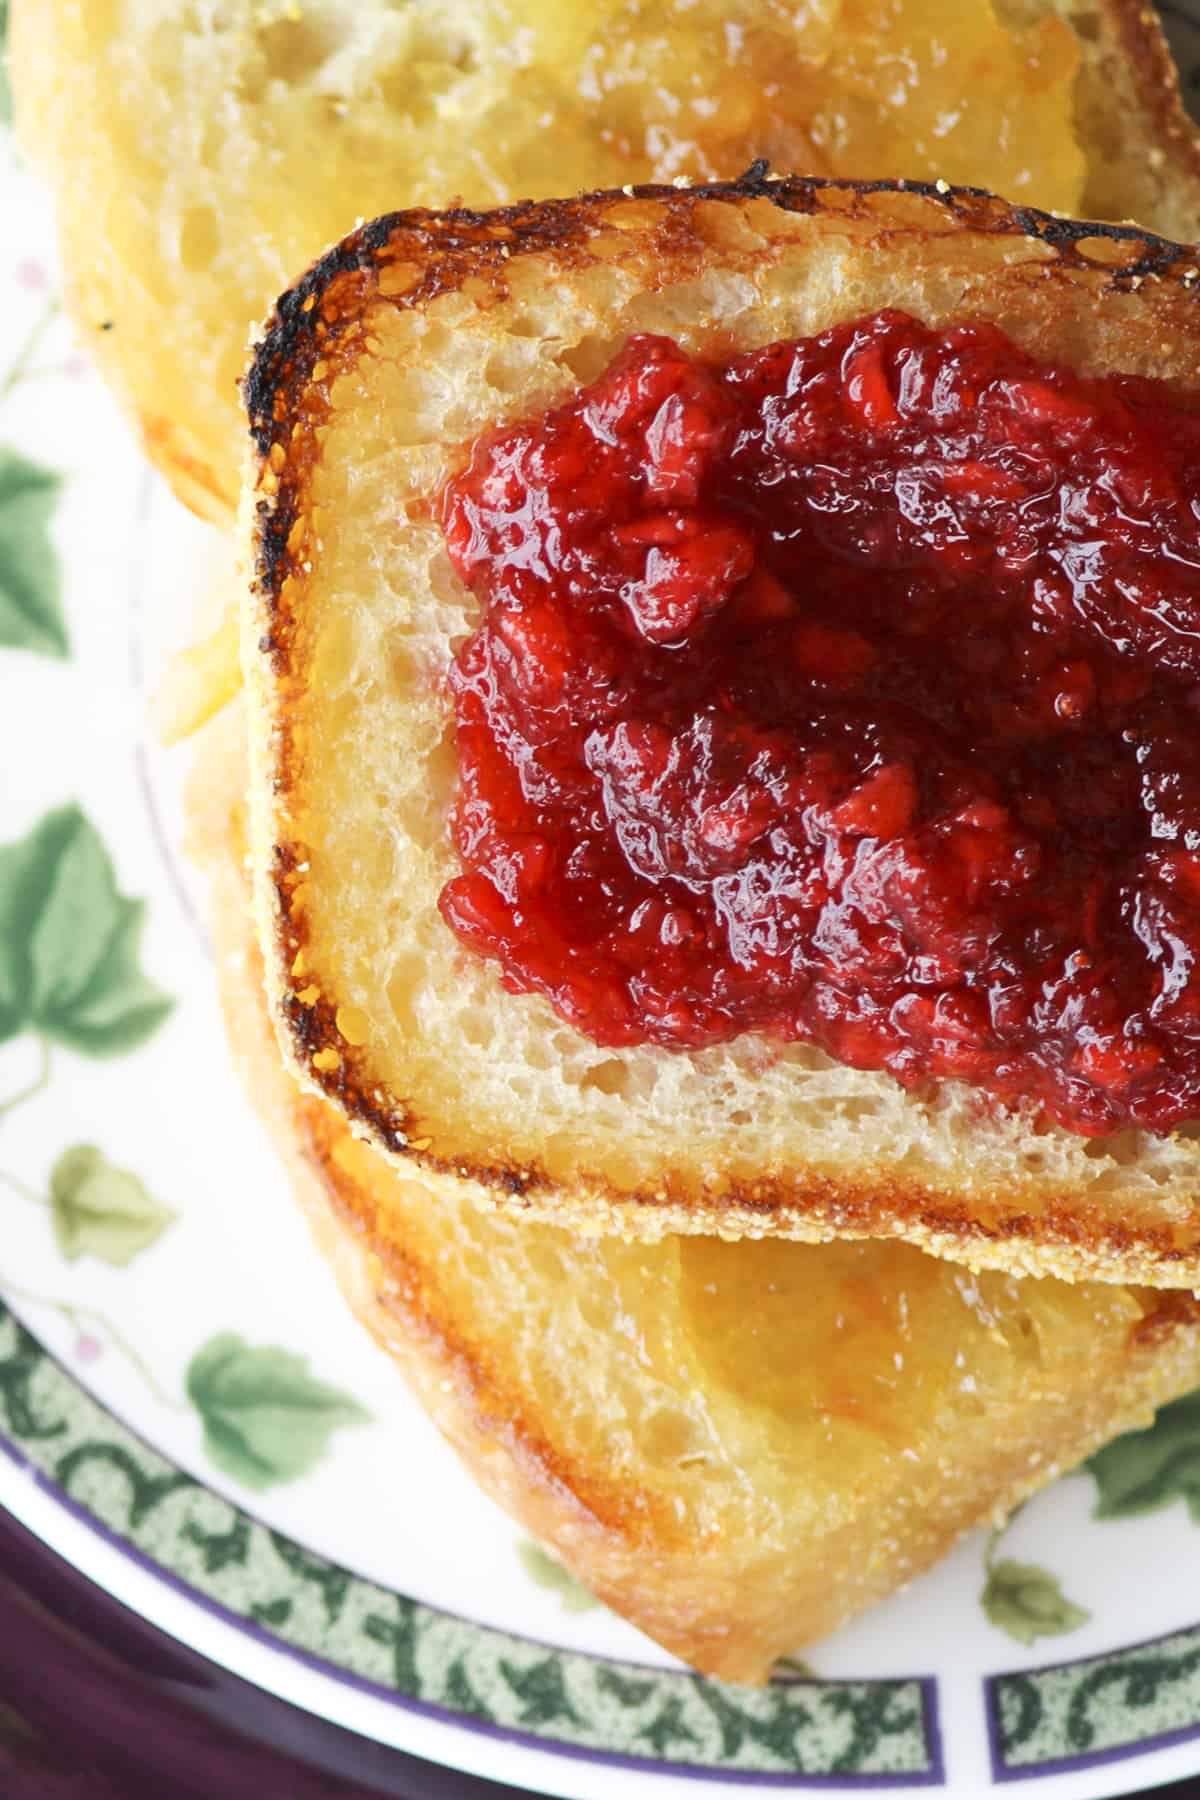 English Muffin Bread topped with strawberry freezer jam and peach freezer jam.